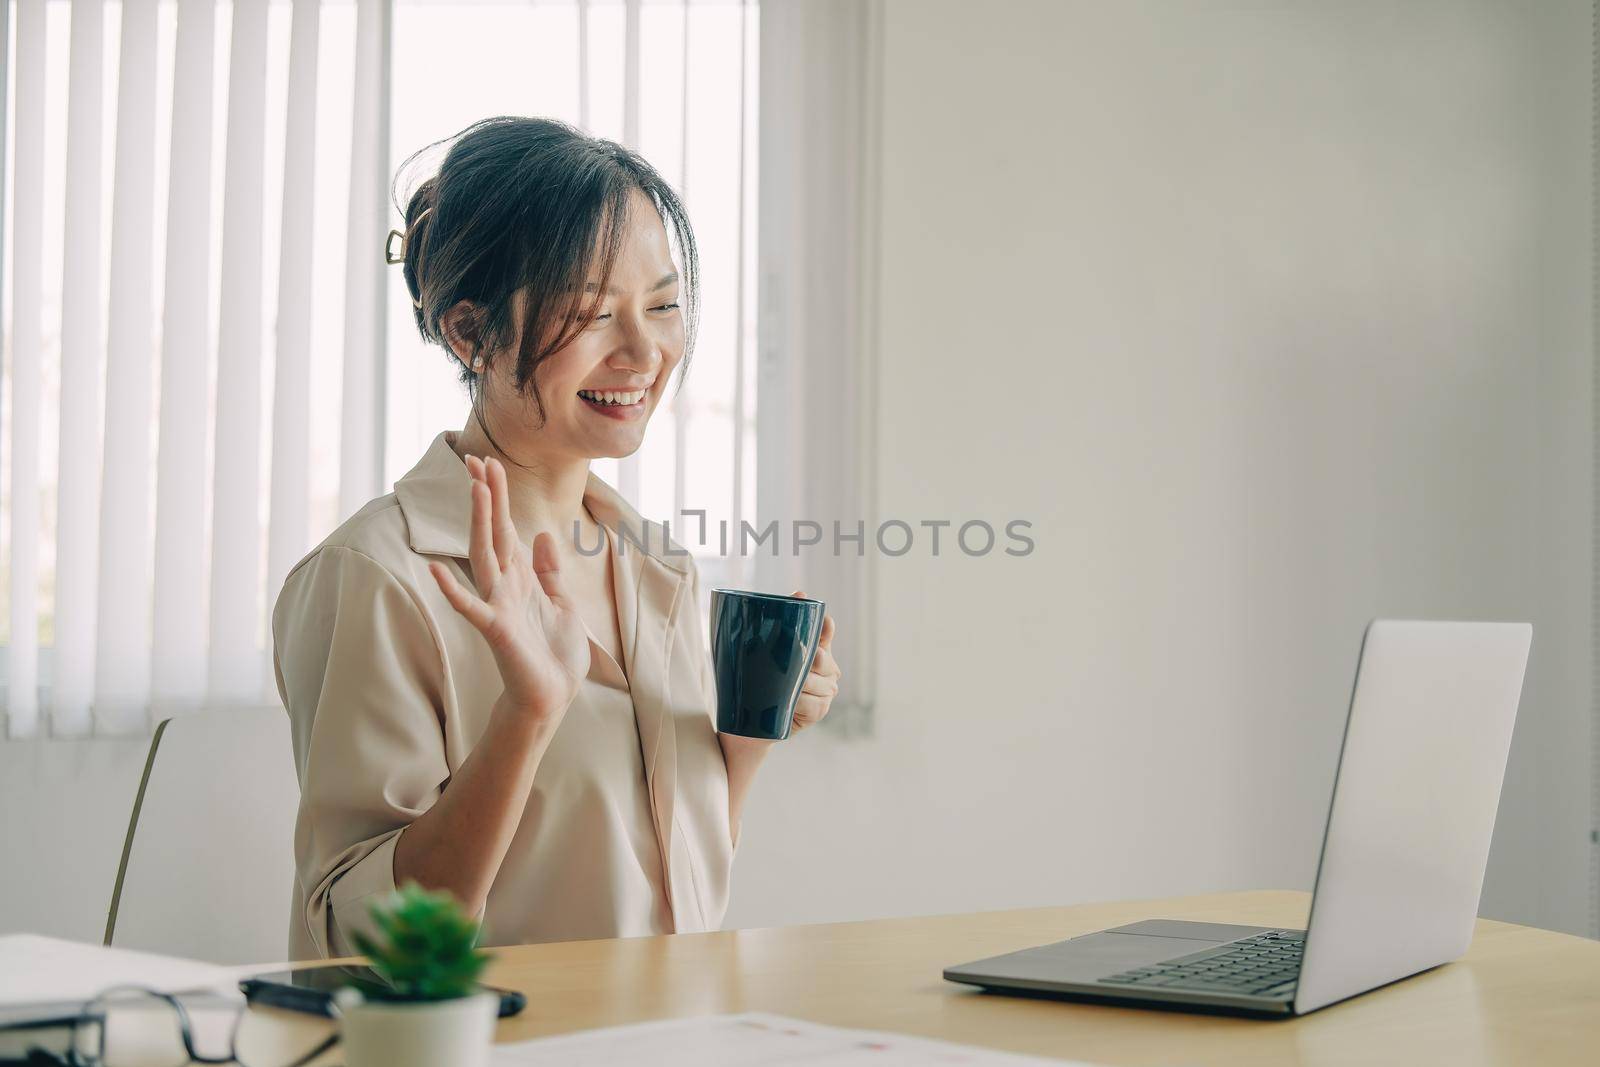 Attractive asian woman having video call via laptop at home office, Consultation, webinar, tutoring on internet, telecommuting concept.